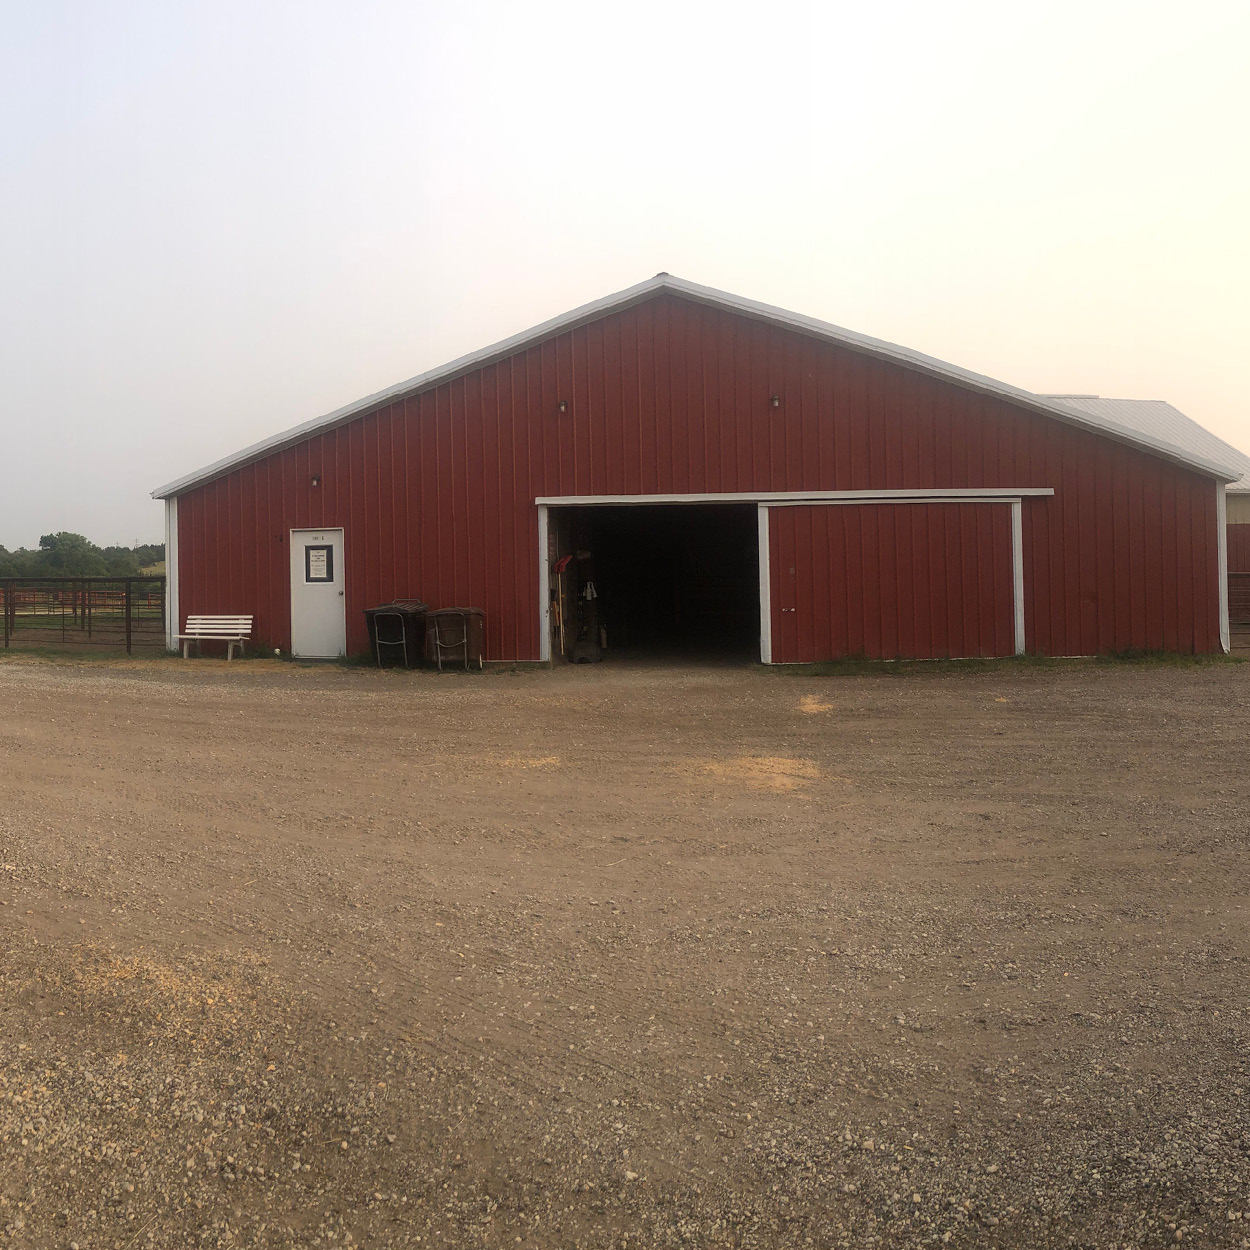 Front of the Barn